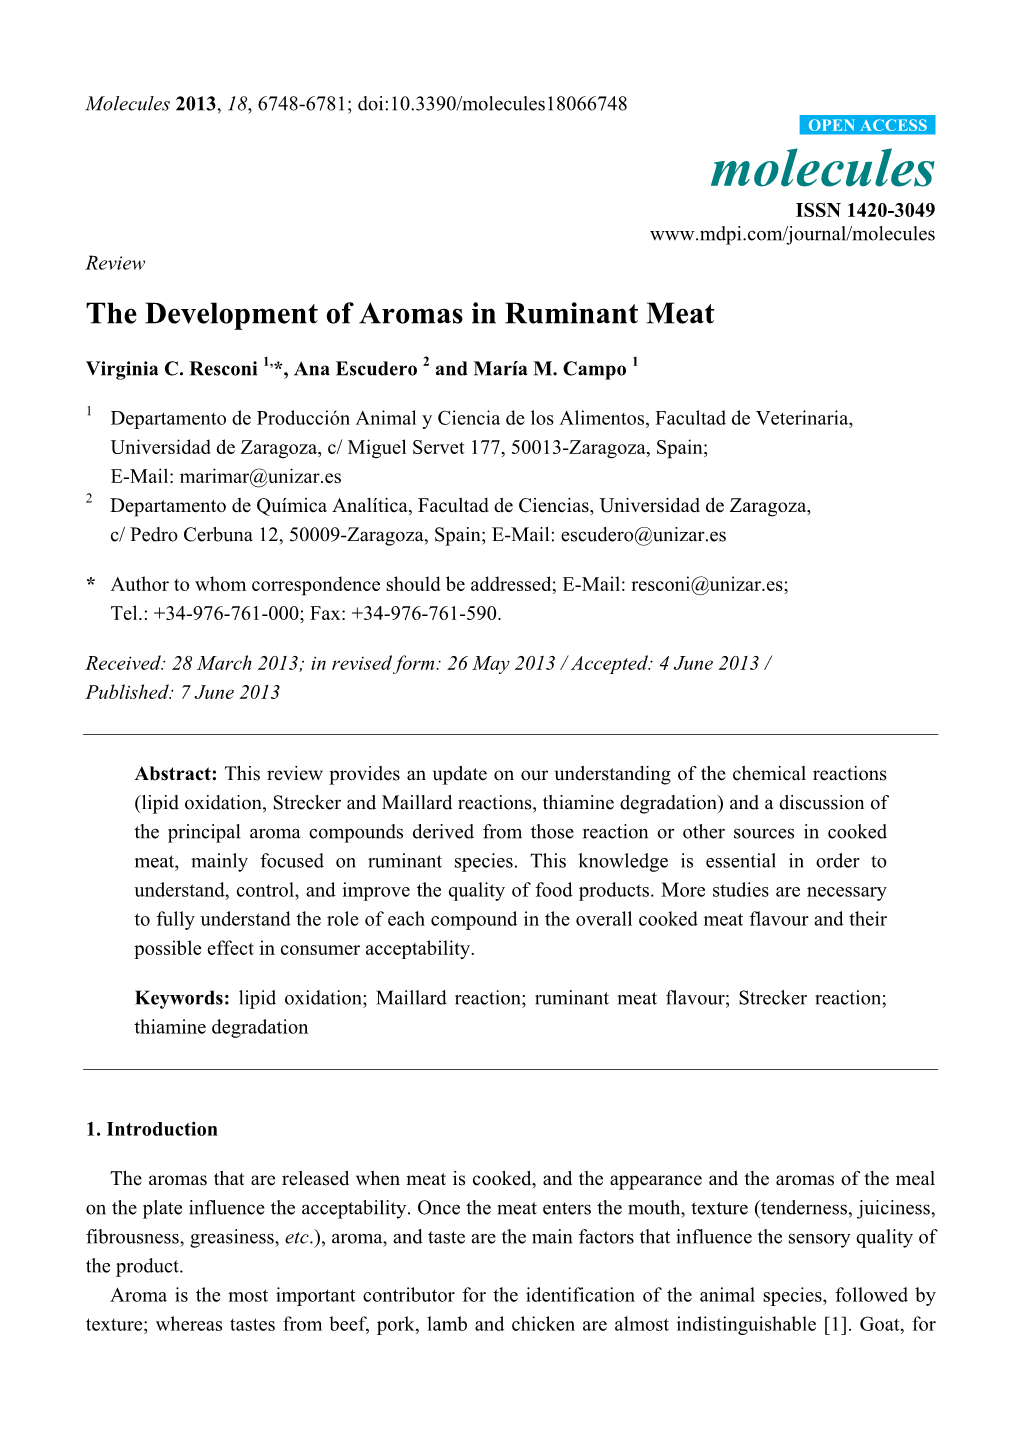 The Development of Aromas in Ruminant Meat